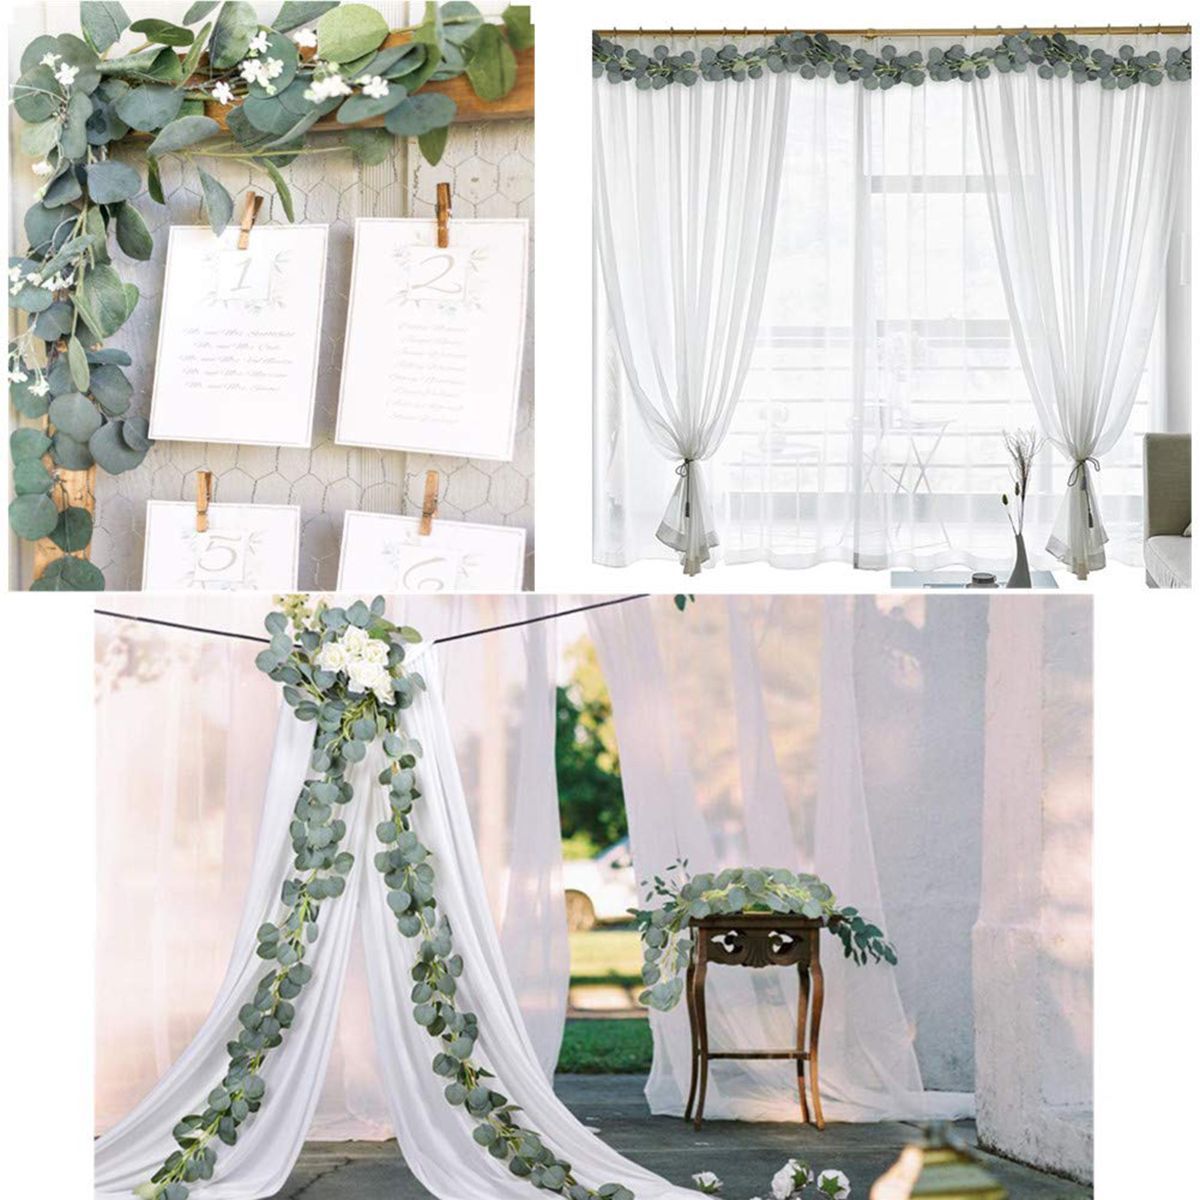 17m-Artificial-Eucalyptus-Leaves-Garland-Vine-Wedding-Greenery-for-Home-Wall-Decorations-1496148